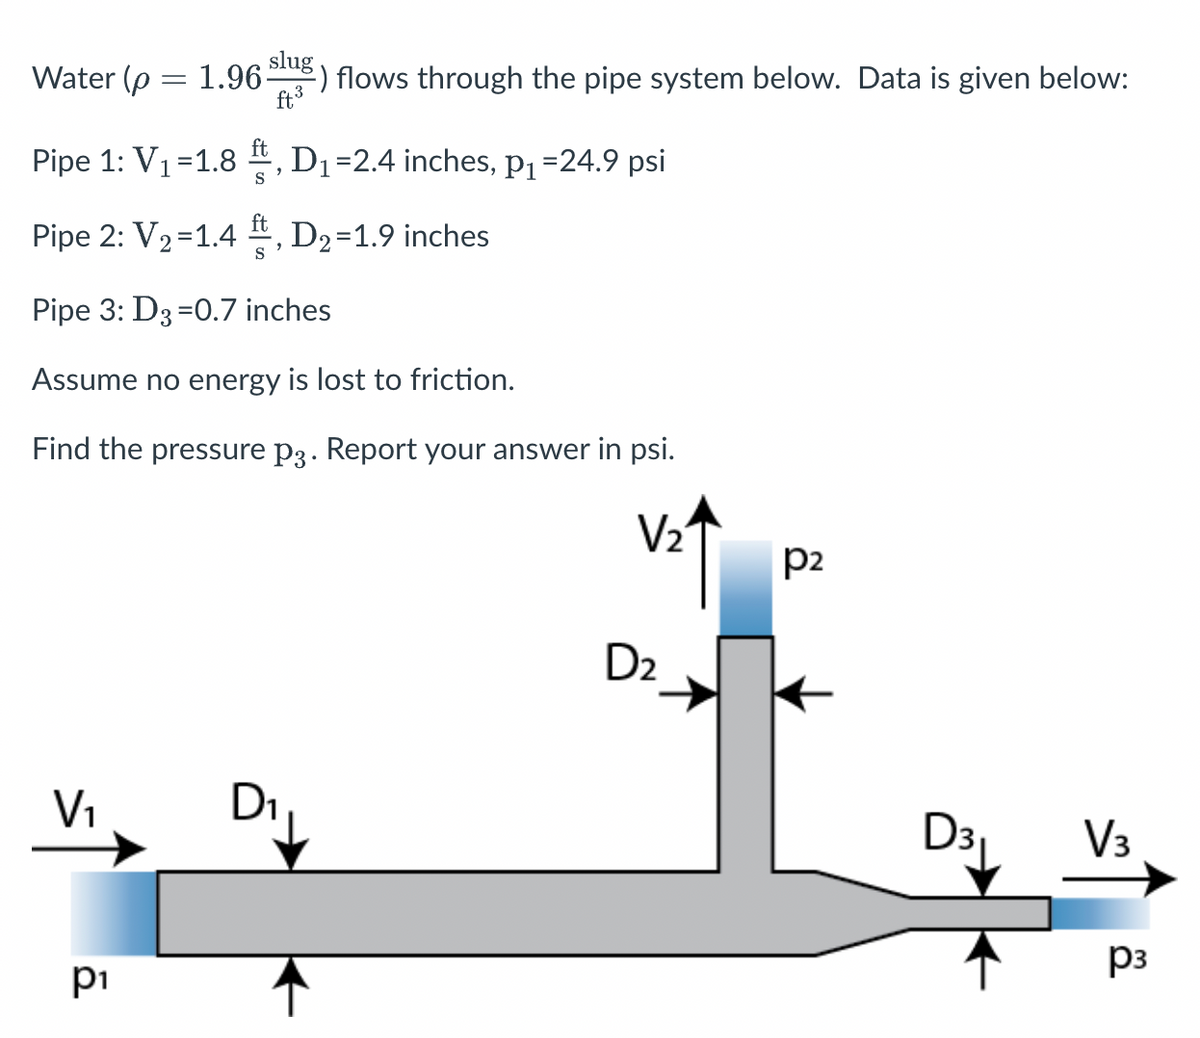 Water (p 1.96- slug) flows through the pipe system below. Data is given below:
=
ft³
Pipe 1: V₁=1.8 ft, D₁ =2.4 inches, p₁ =24.9 psi
Pipe 2: V₂=1.4 t, D₂=1.9 inches
2
Pipe 3: D3=0.7 inches
Assume no energy is lost to friction.
Find the pressure p3. Report your answer in psi.
V₂
V₁
P₁
D₁
D₂
P2
D3₁
V3
P3